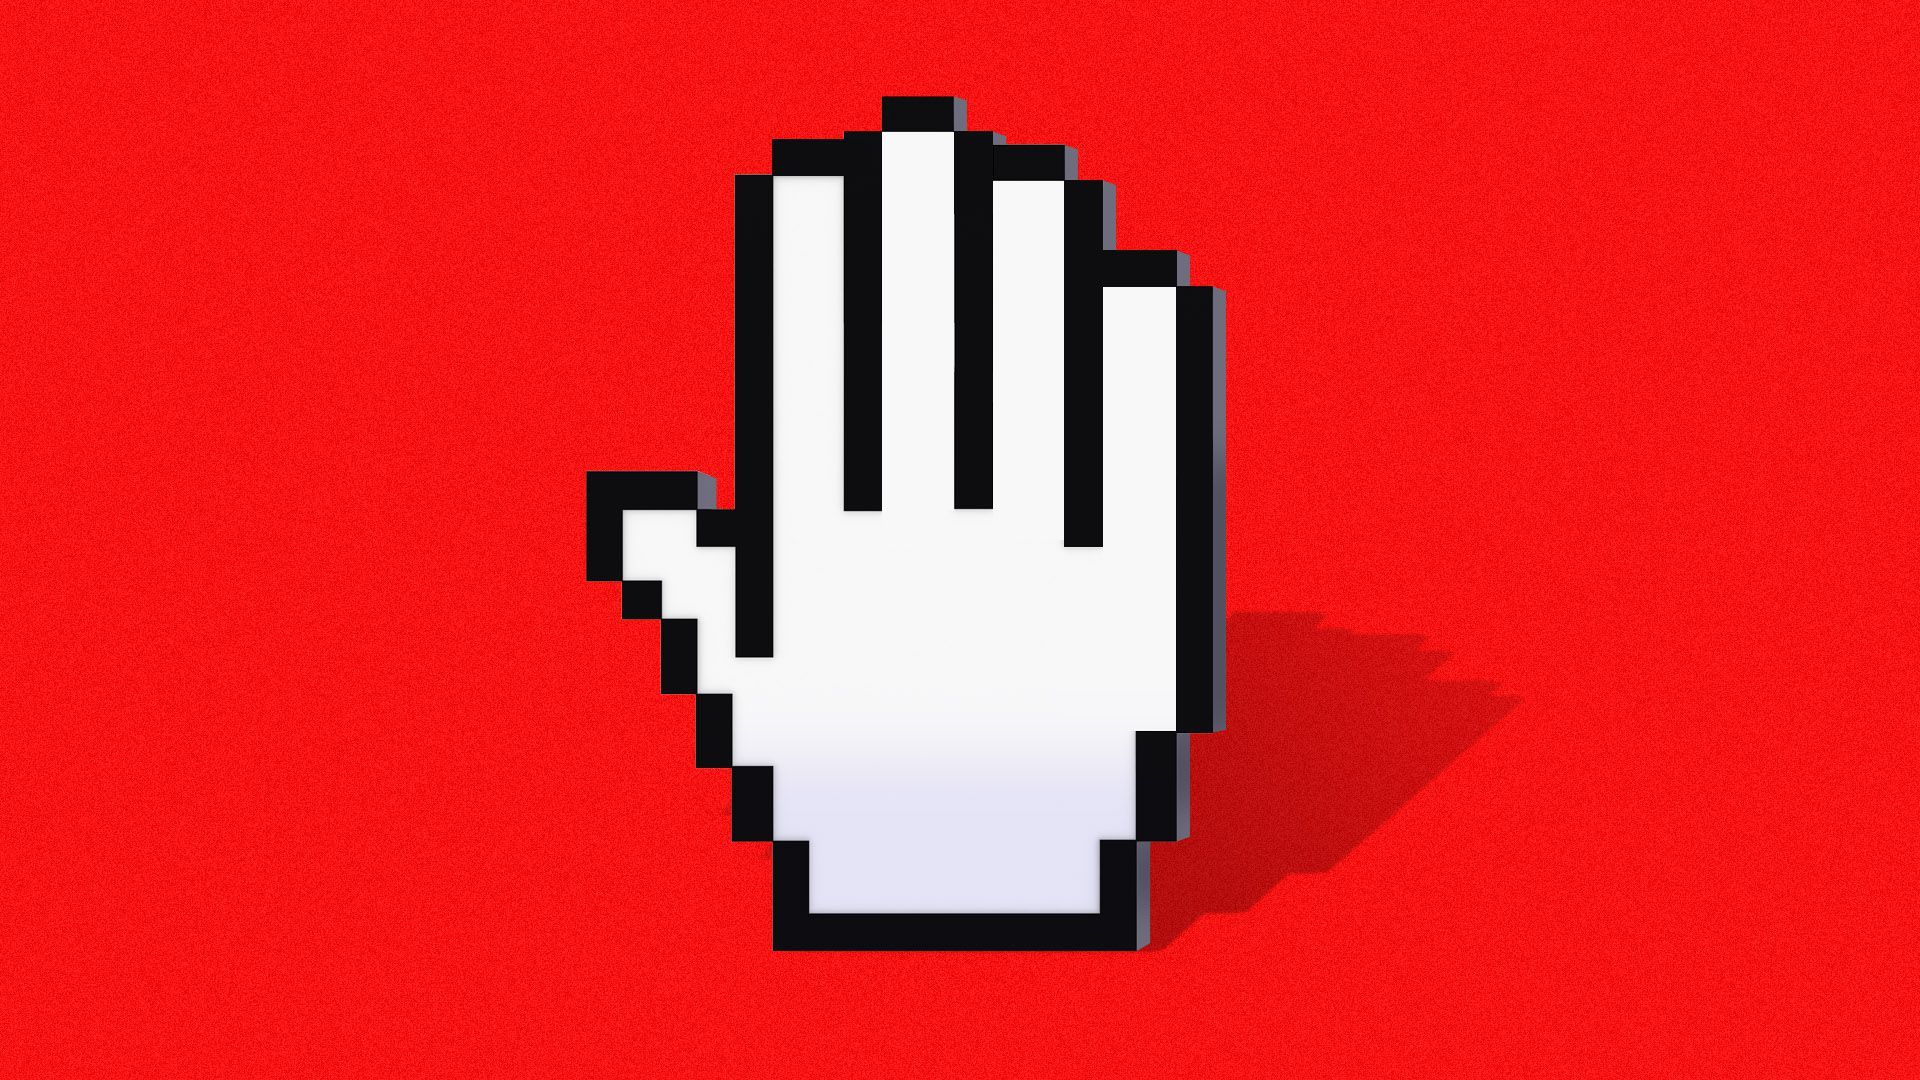 Illustration of a cursor hand making a stopping gesture